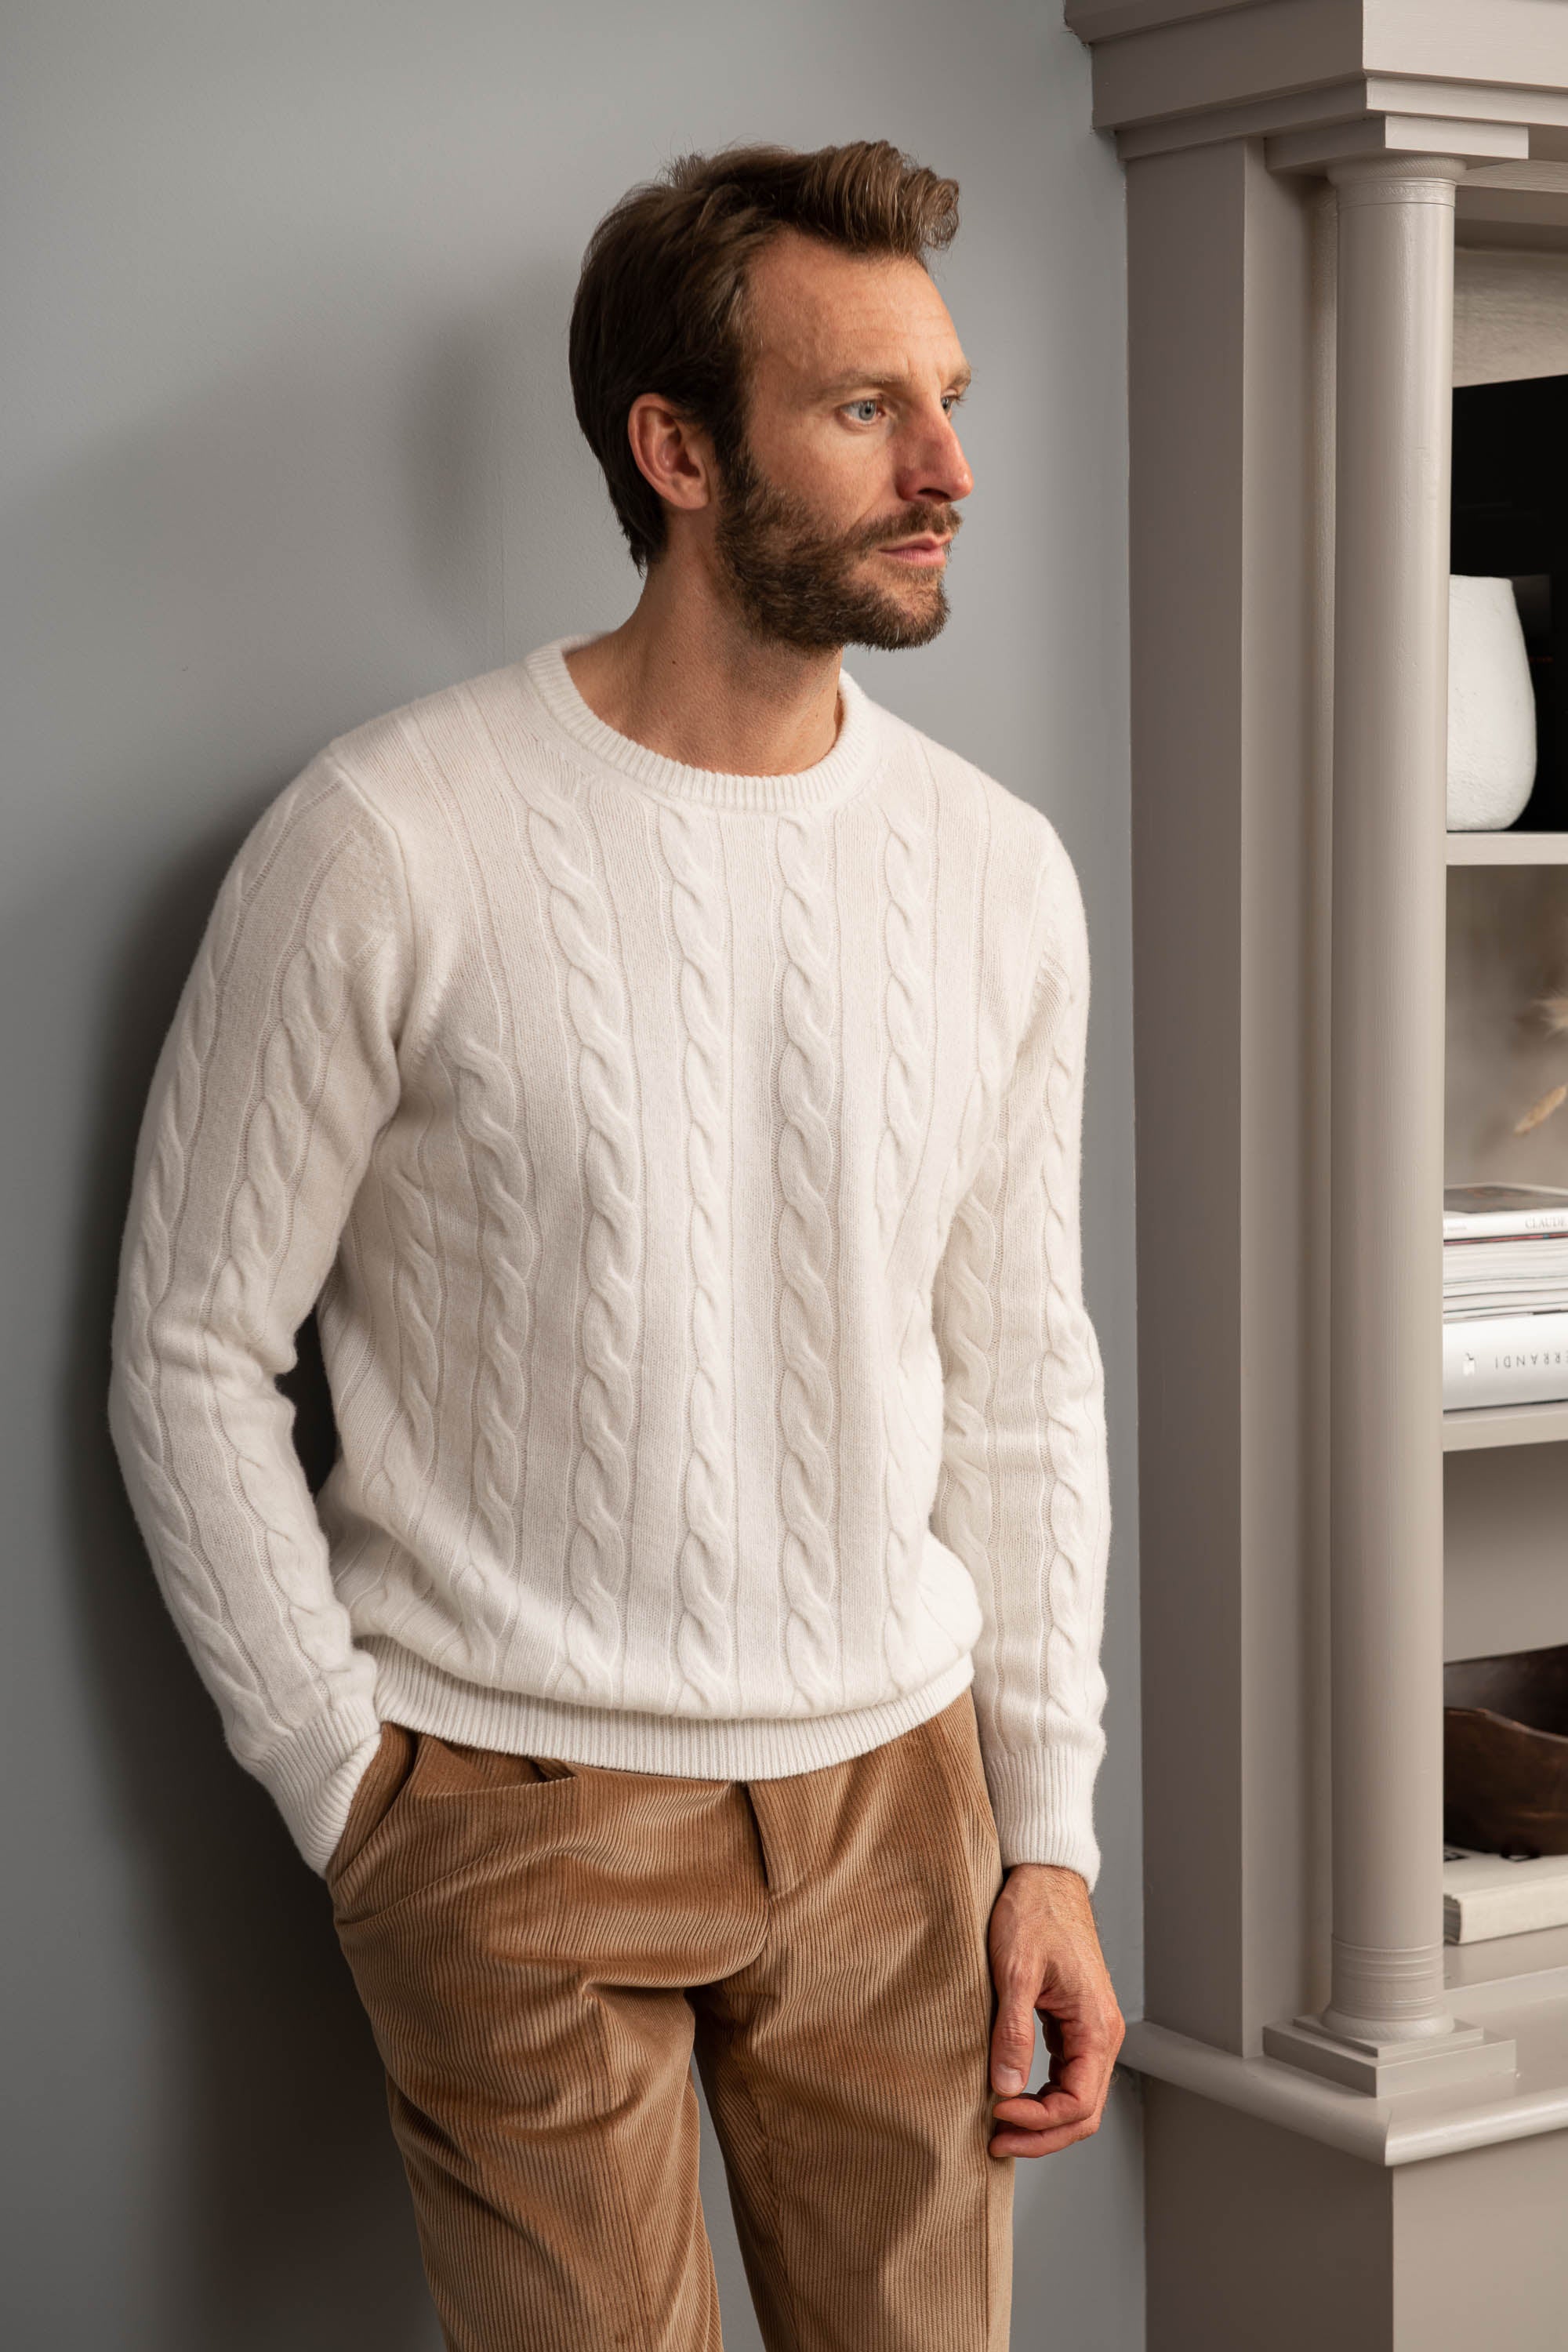  Cable sweater,white cable knitwear, wool and cash,mere knitwear, wool sweater, cashmere sweater, white cable knit sweater, Maglione a cavi, maglia a cavi bianca, lana e cash, maglieria semplice, maglione di lana, maglione di cashmere, maglione a cavi bianca, Pull en câble, maille en câble blanche, laine et cachemire, maille en câble, pull en laine, pull en cachemire, pull en câble blanche